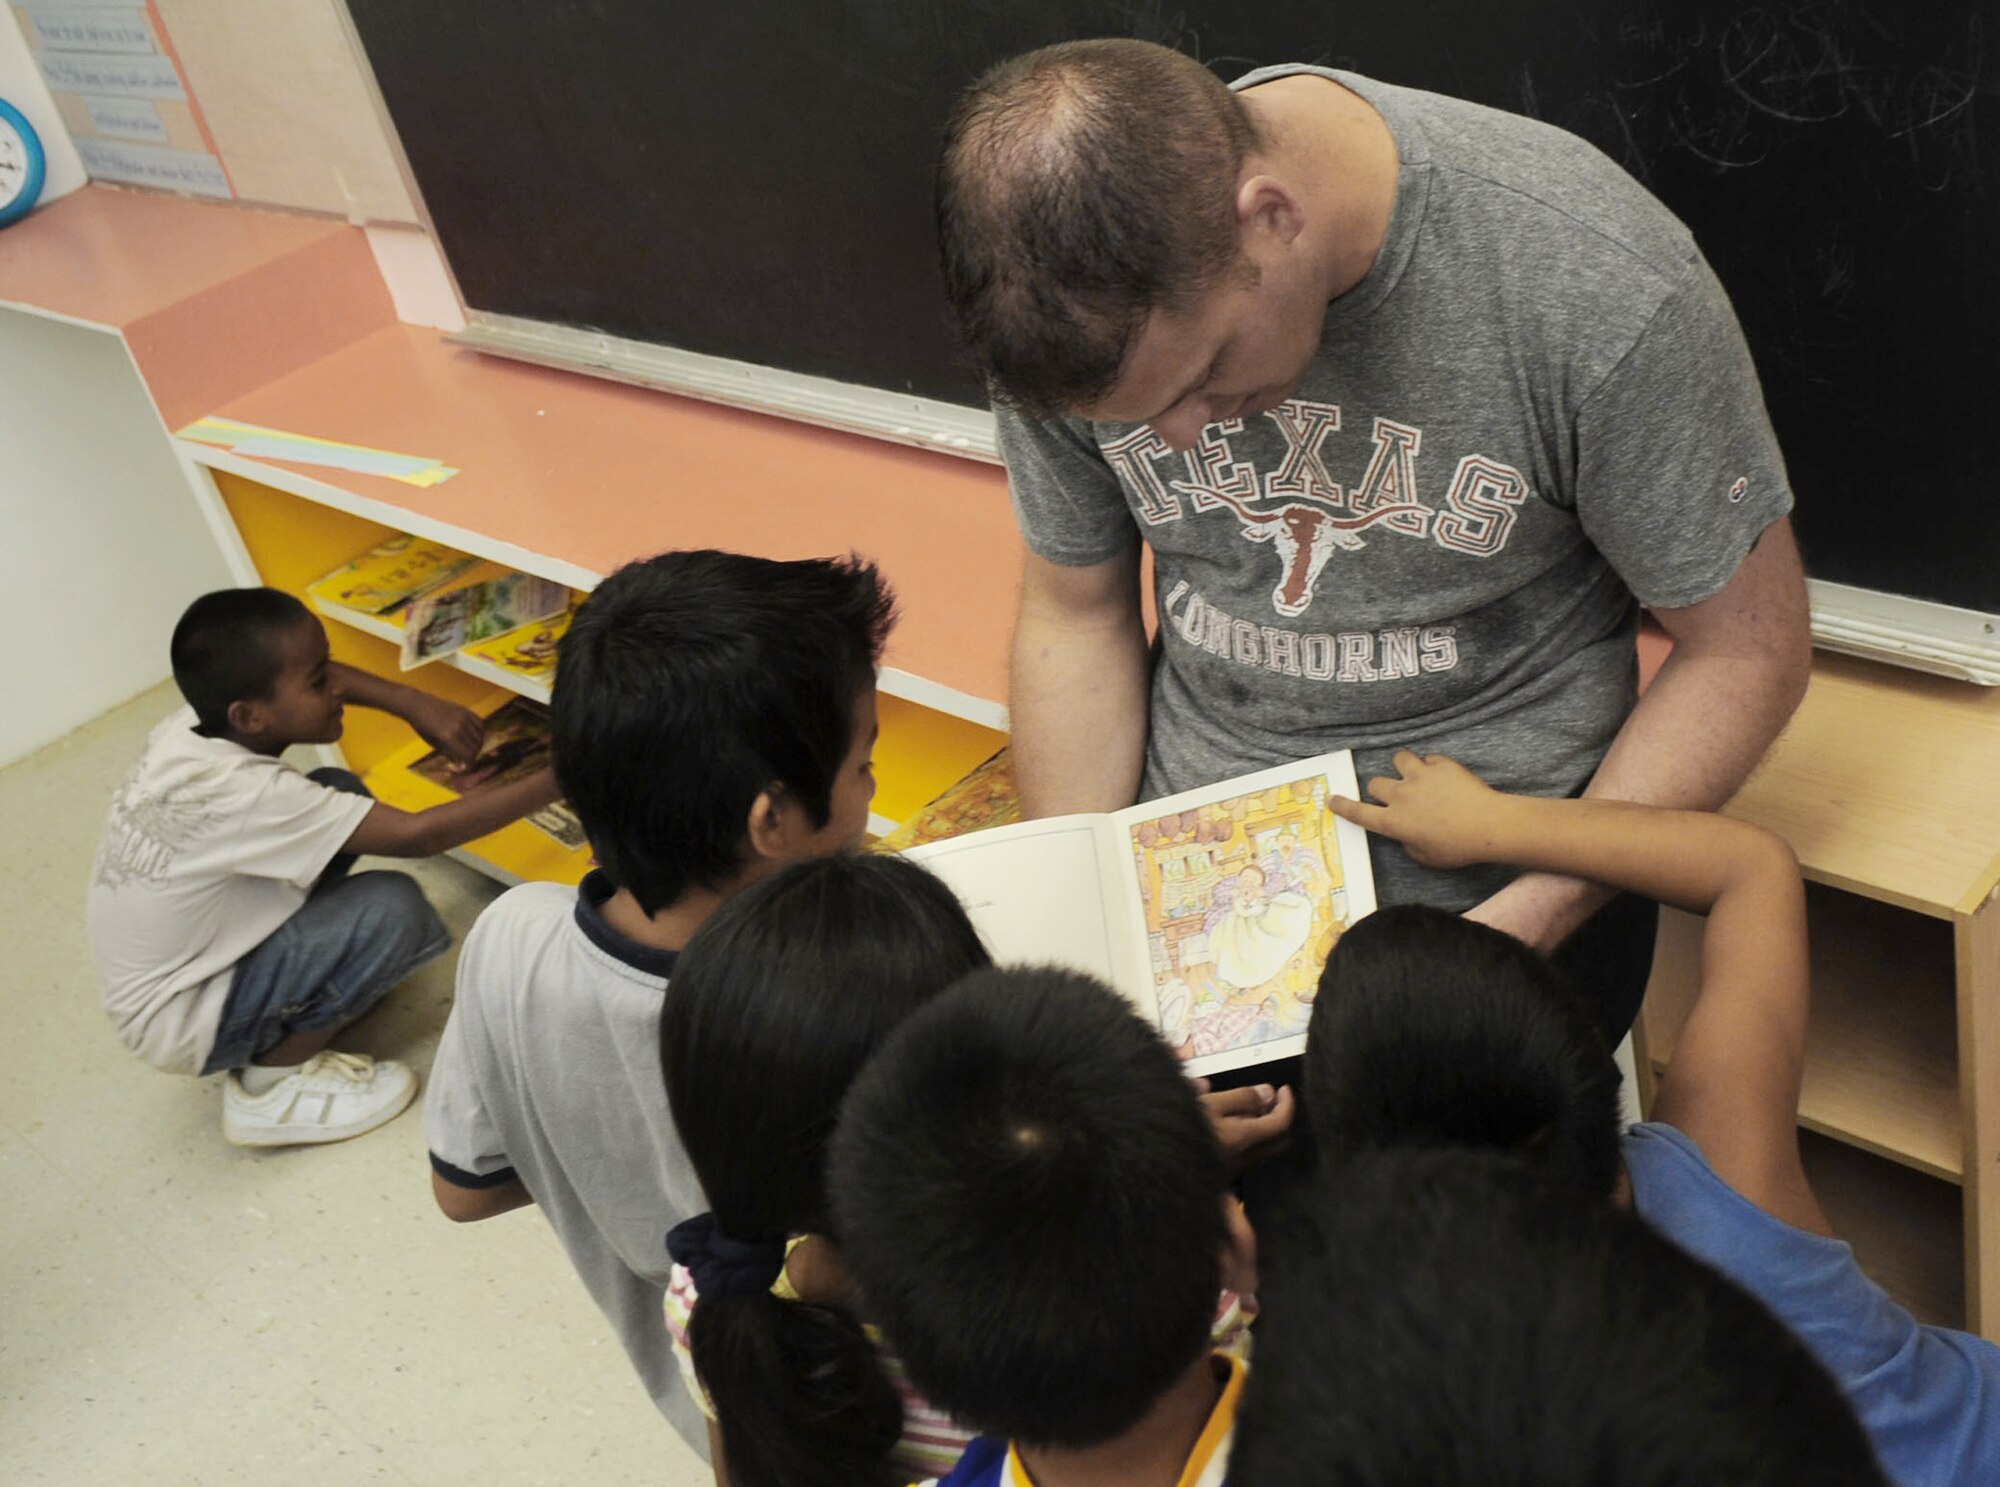 Staff Sgt. Frank Ruckel reads to some of the third and fourth graders June 19 at Machananao Elementary School in Agana, Guam. The Dripping Springs, Texas, native is deployed to Andersen Air Force Base, Guam, from Elmendorf AFB, Alaska, to support U.S. Pacific Command's continuous bomber presence in the Asia-Pacific Region. Sergeant Ruckel is a 3rd Expeditionary Maintenance Unit aircraft metals technologist. (U.S. Air Force photo/Senior Airman Christopher Bush)